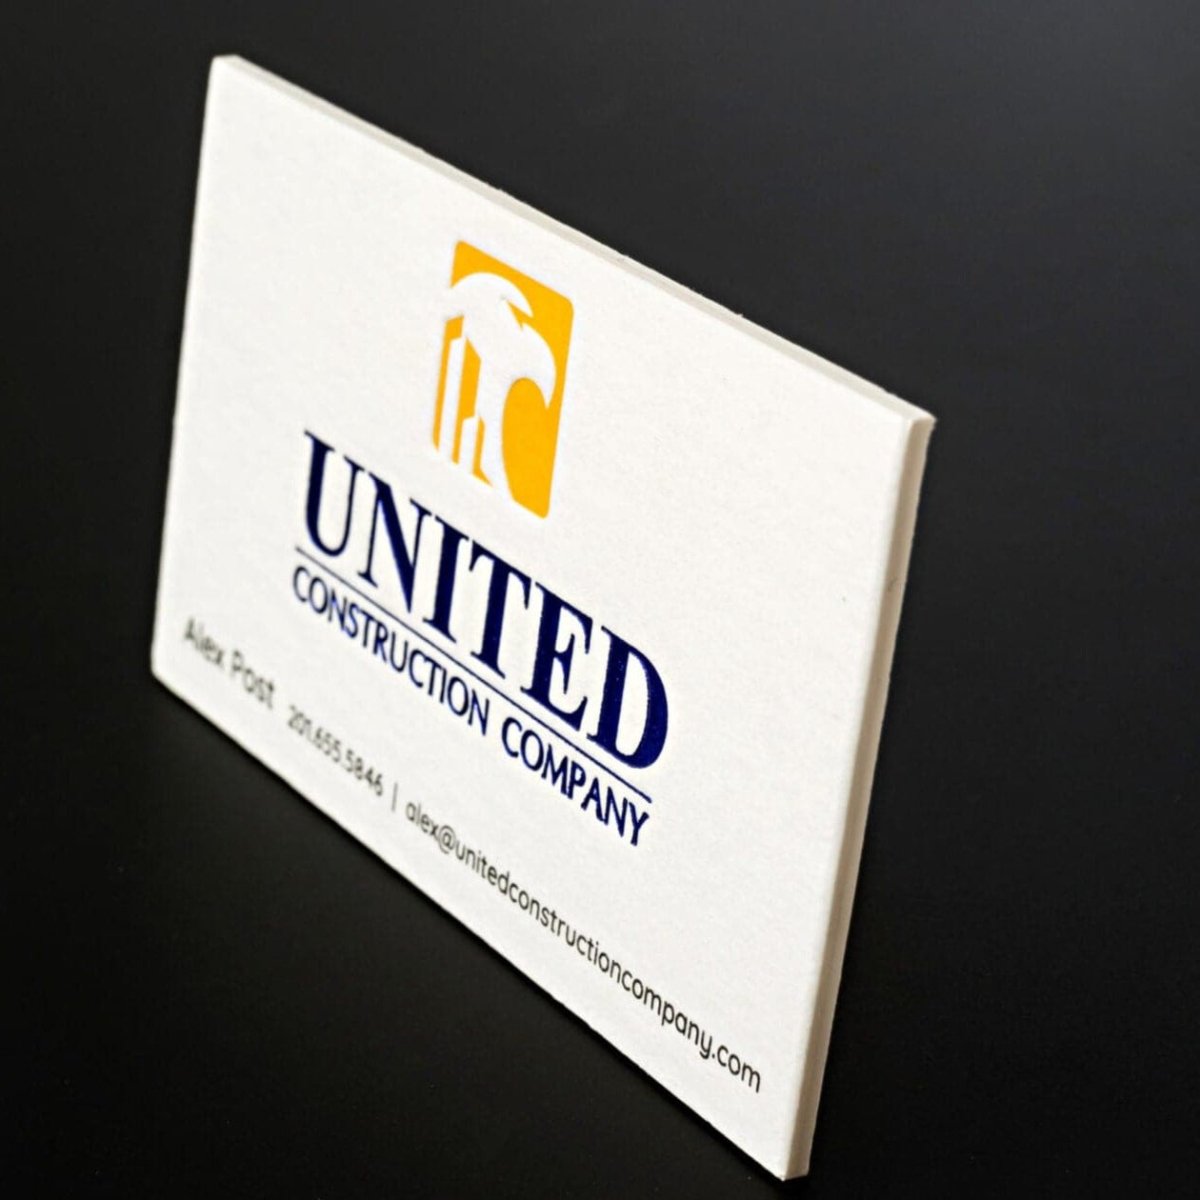 Ultra Thick Business Cards - JoinPrint US